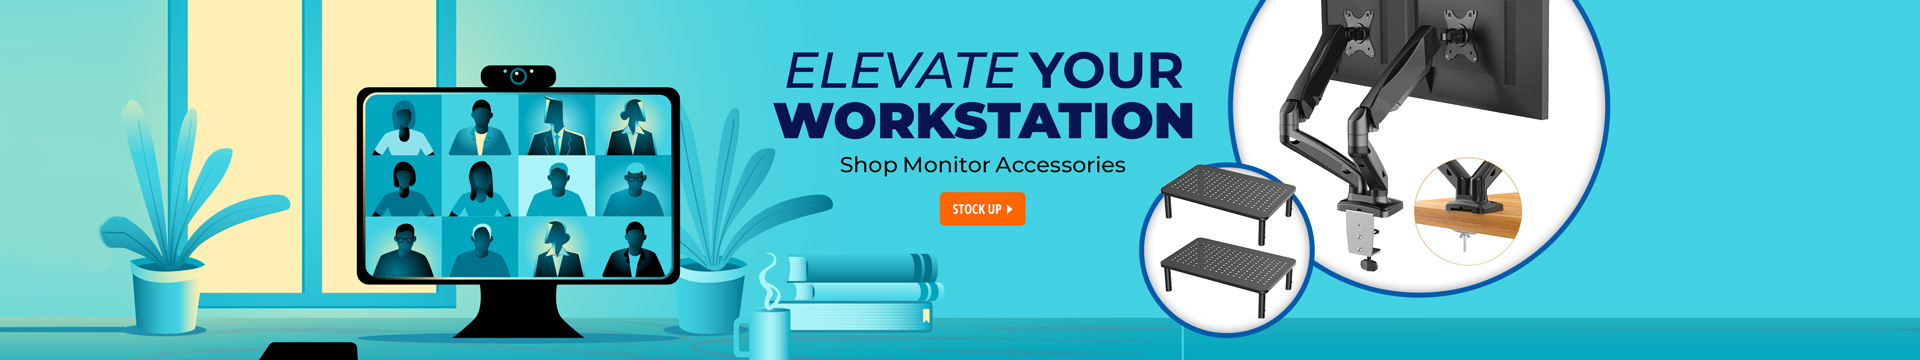 Elevate Your Workstation